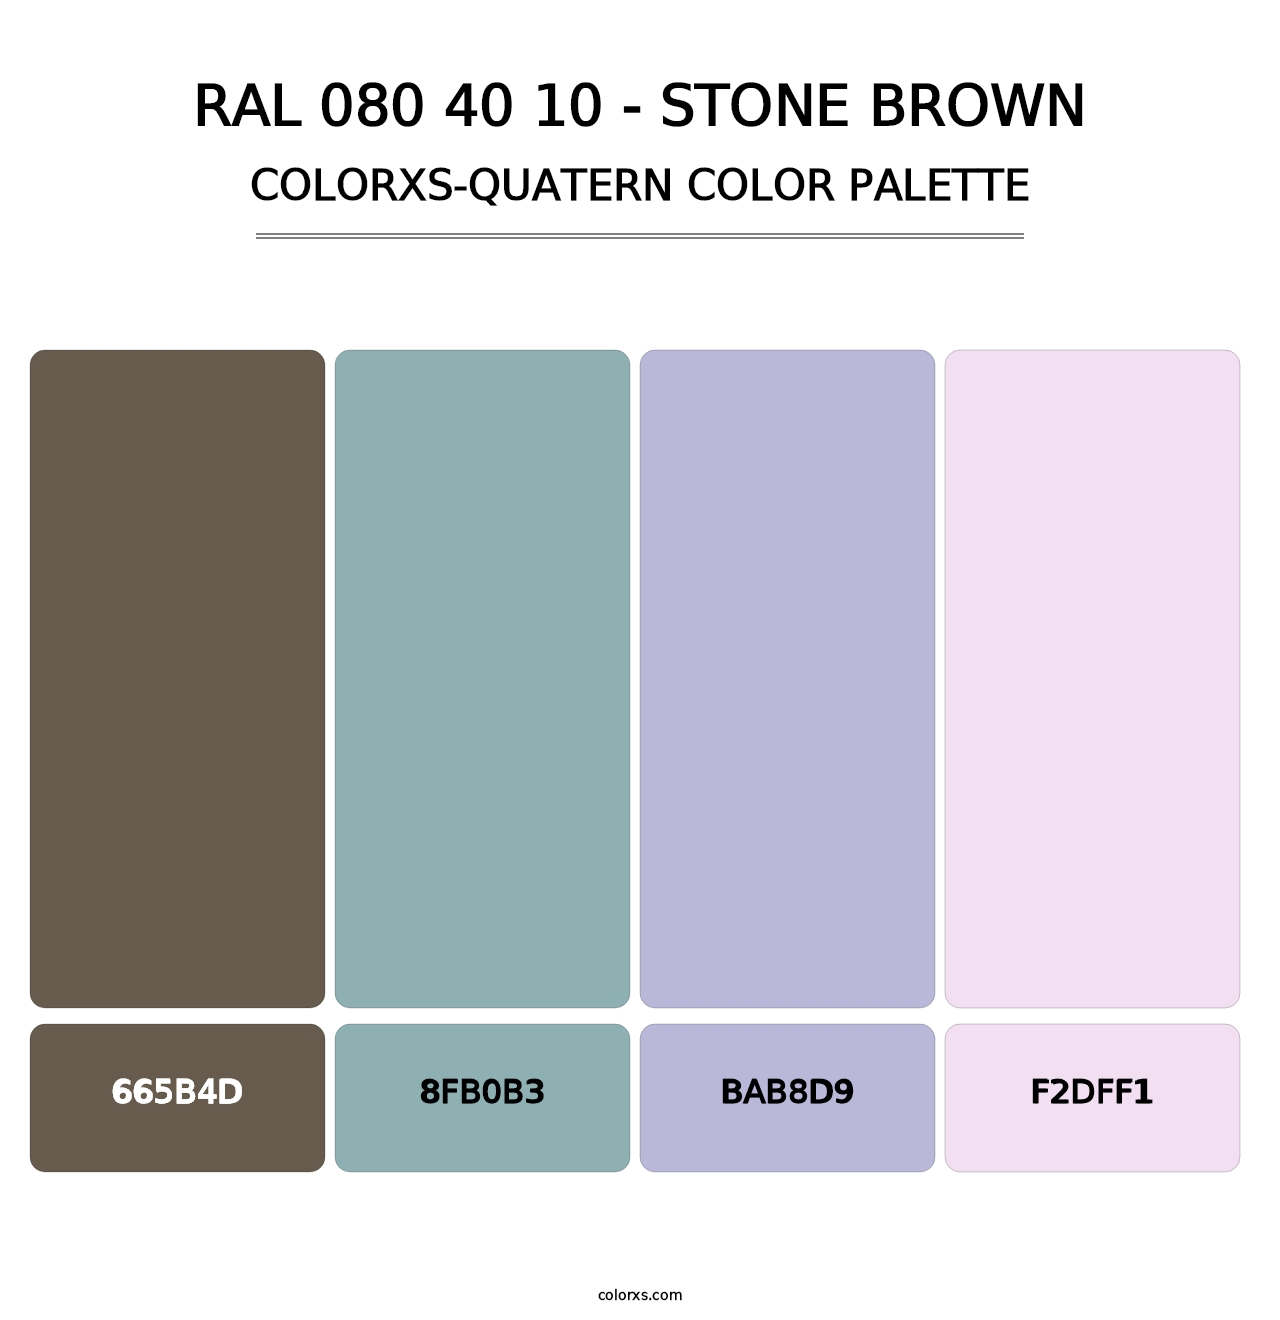 RAL 080 40 10 - Stone Brown - Colorxs Quatern Palette